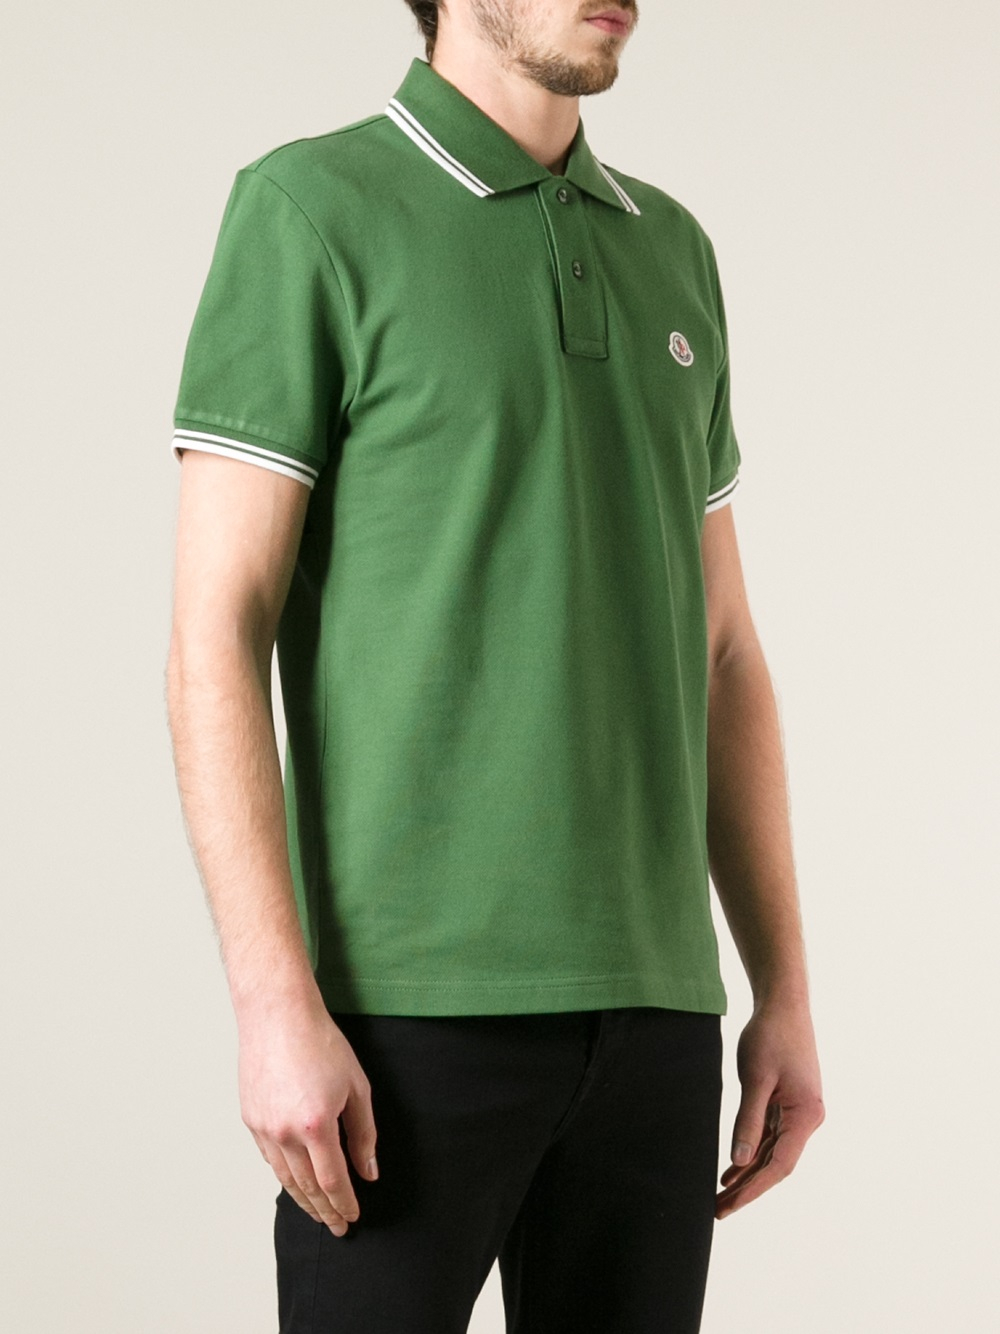 Lyst - Moncler Striped Trim Polo Shirt in Green for Men